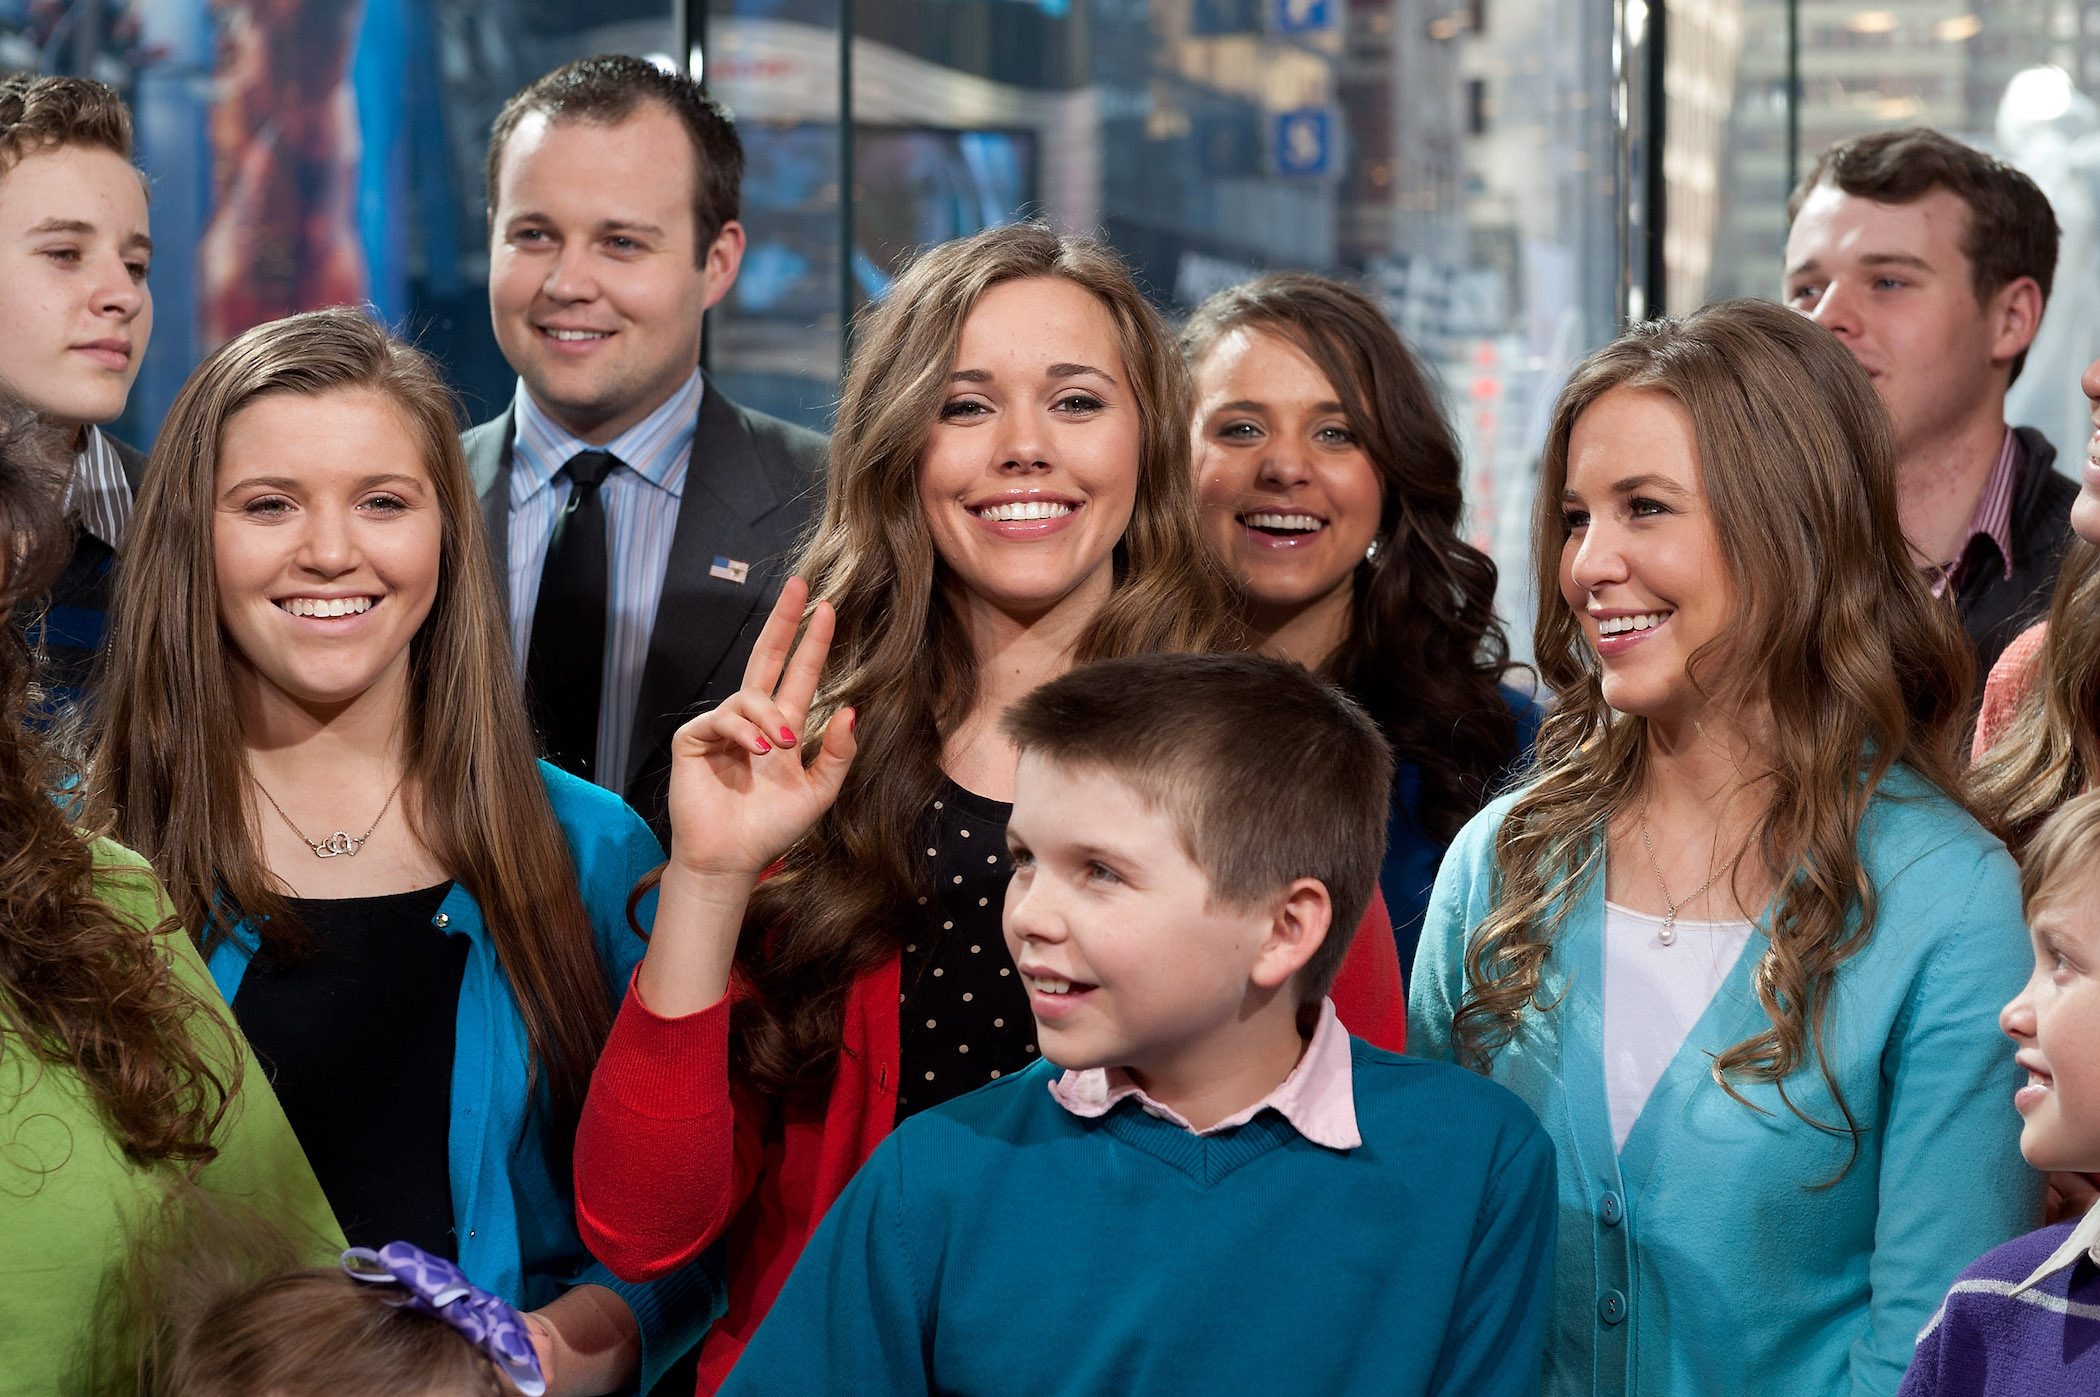 Jessa Duggar surrounded by the rest of the Duggar family on the set of 'Extra'